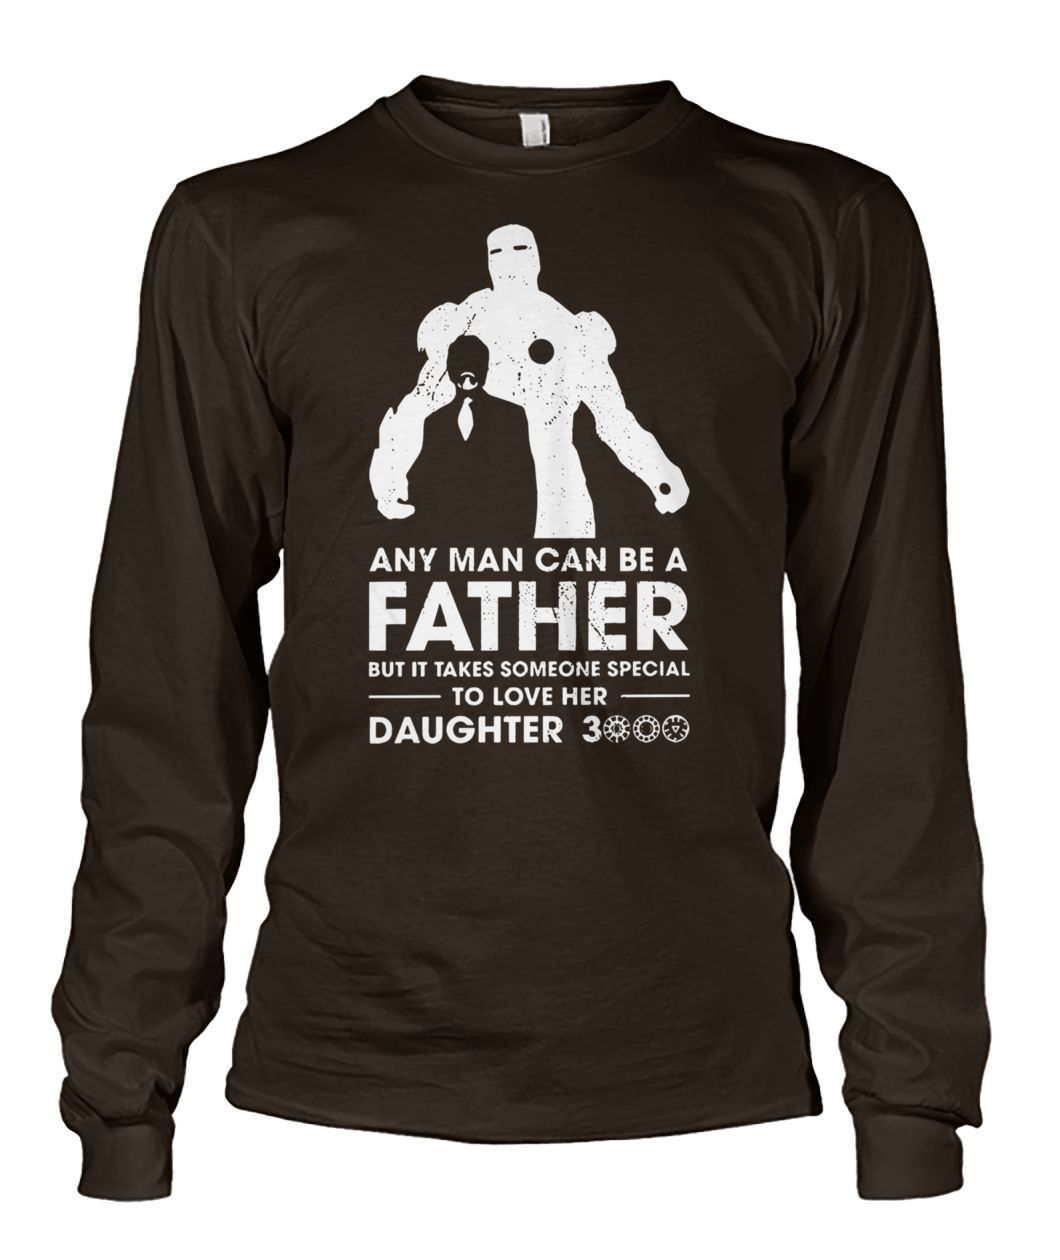 Iron man any man can be a father but it takes someone special to love her daughter 3000 unisex long sleeve